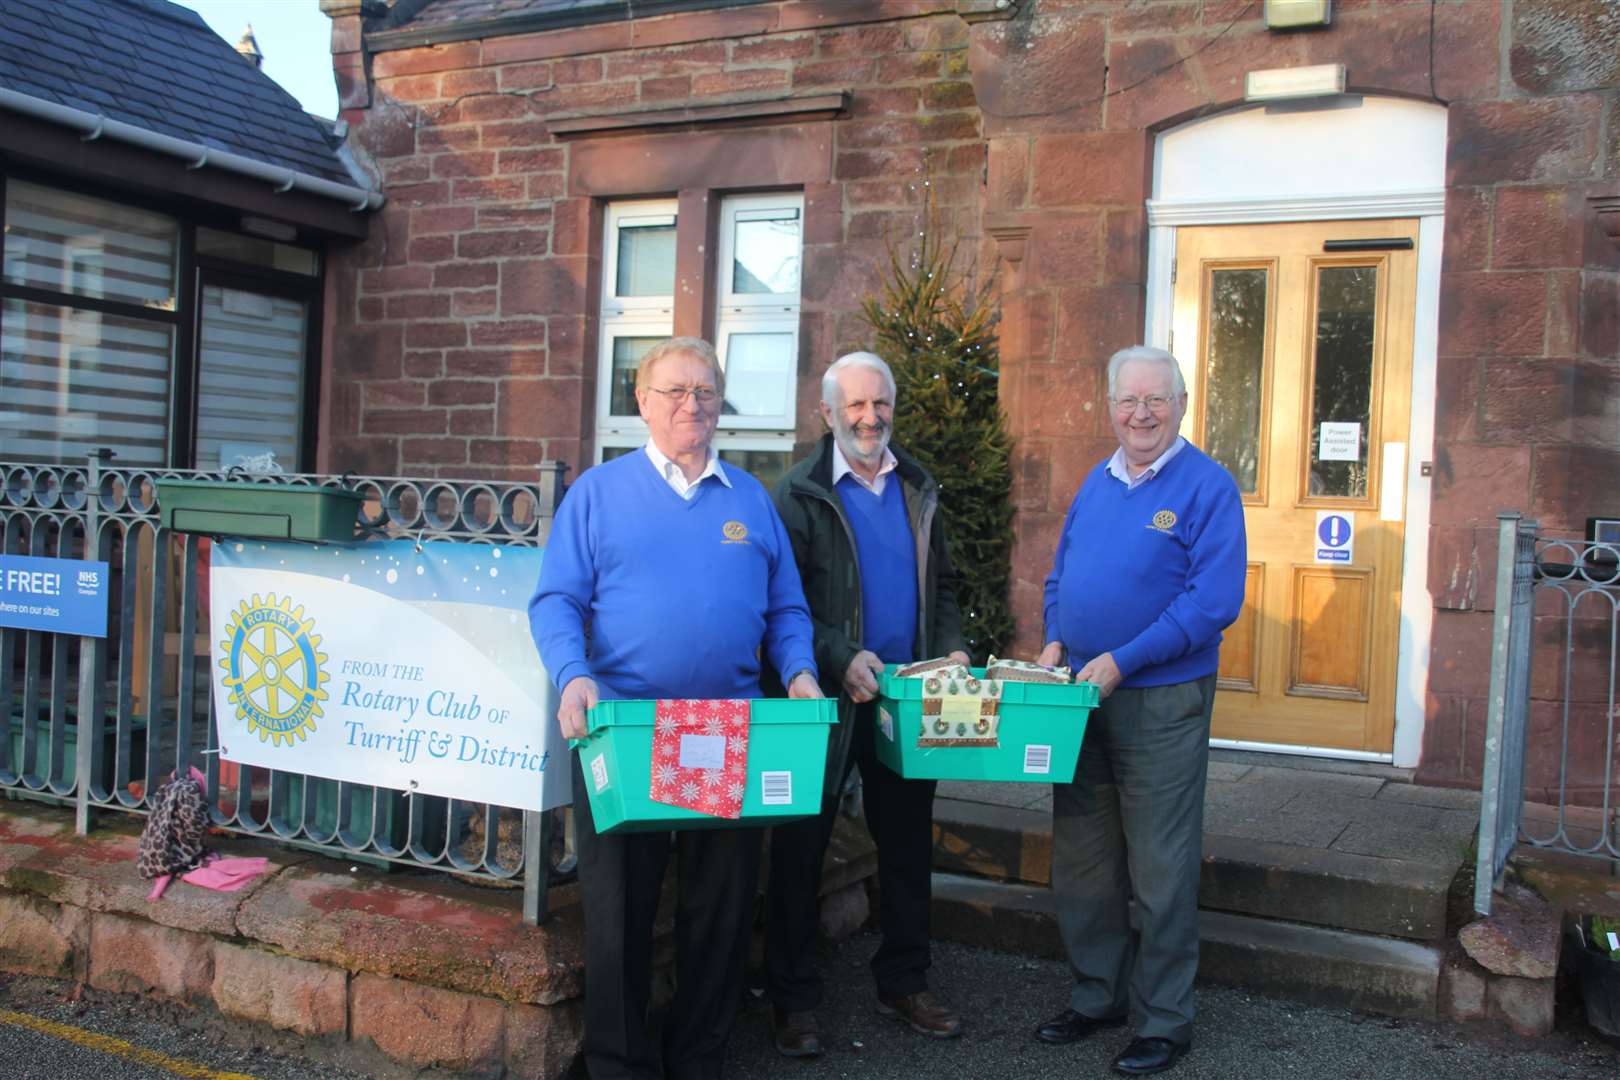 Rotary club members Iain Matthews, Robert Pirie and Charlie Laing visited the hospital to distribute parcels. Picture: Kirsty Brown